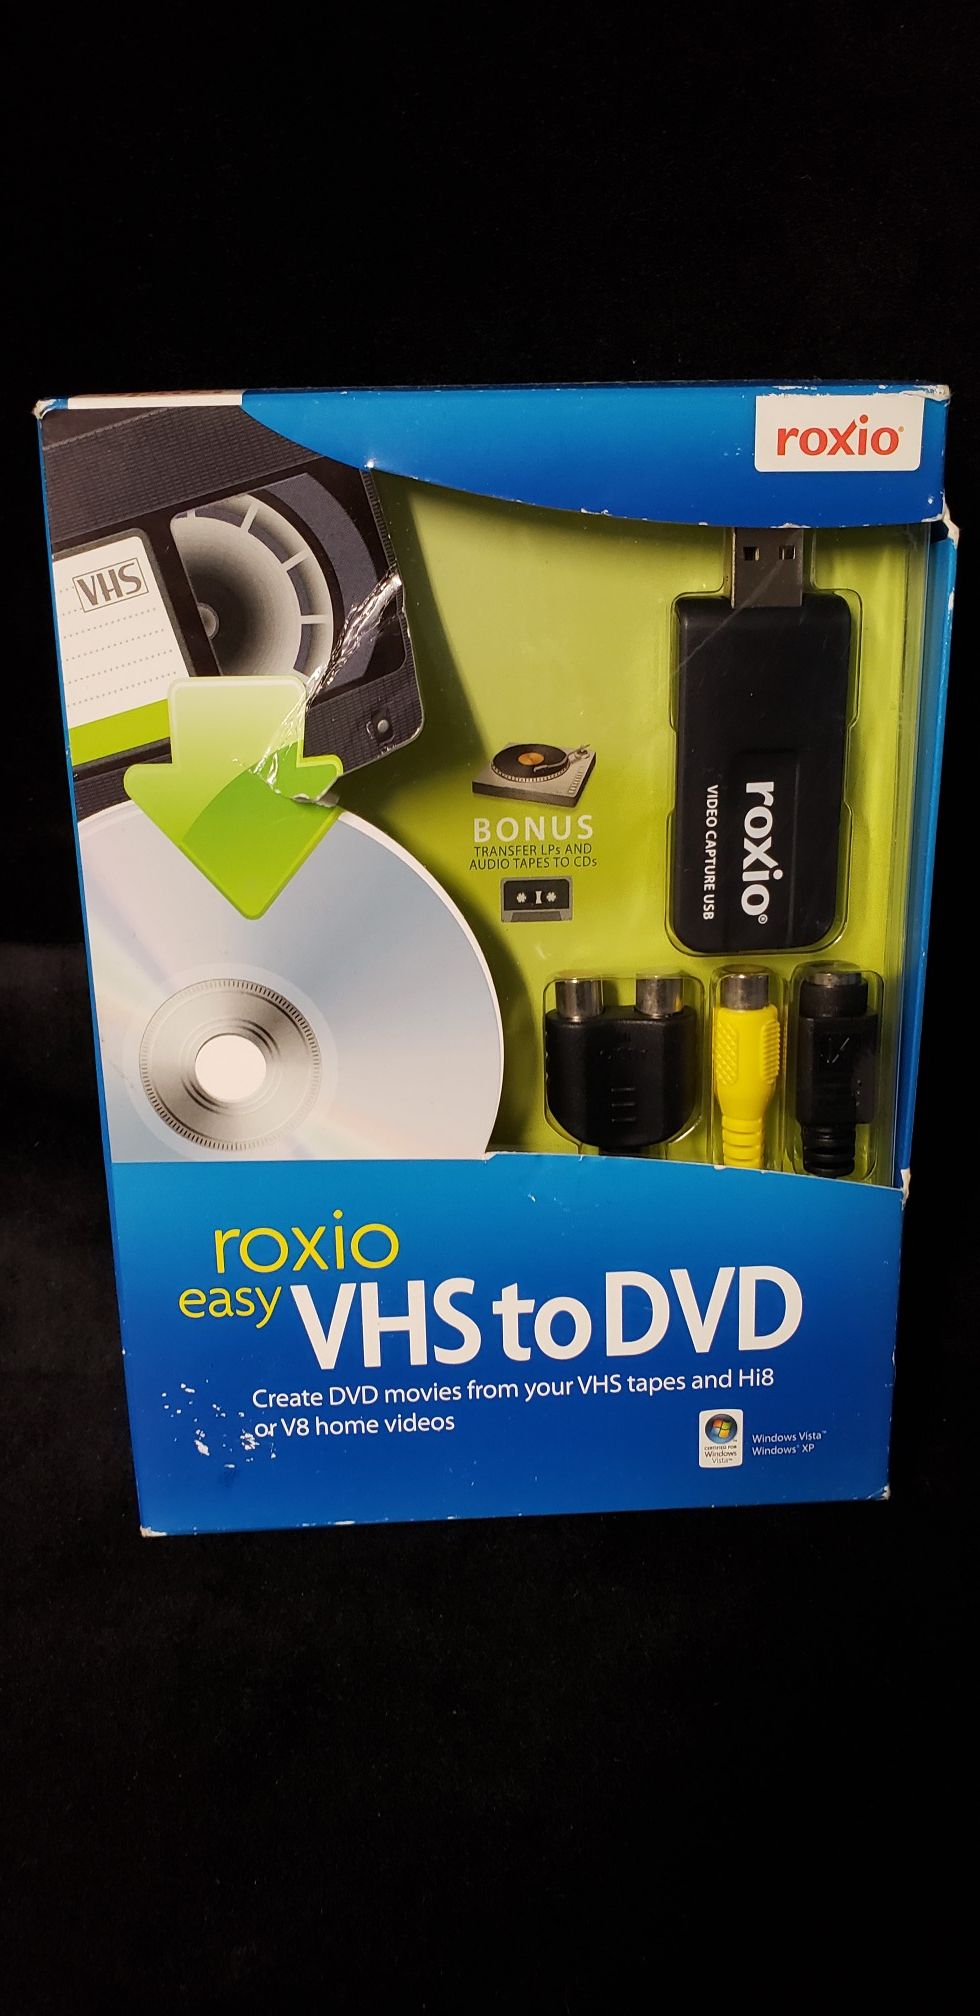 New Roxio VHS to DVD